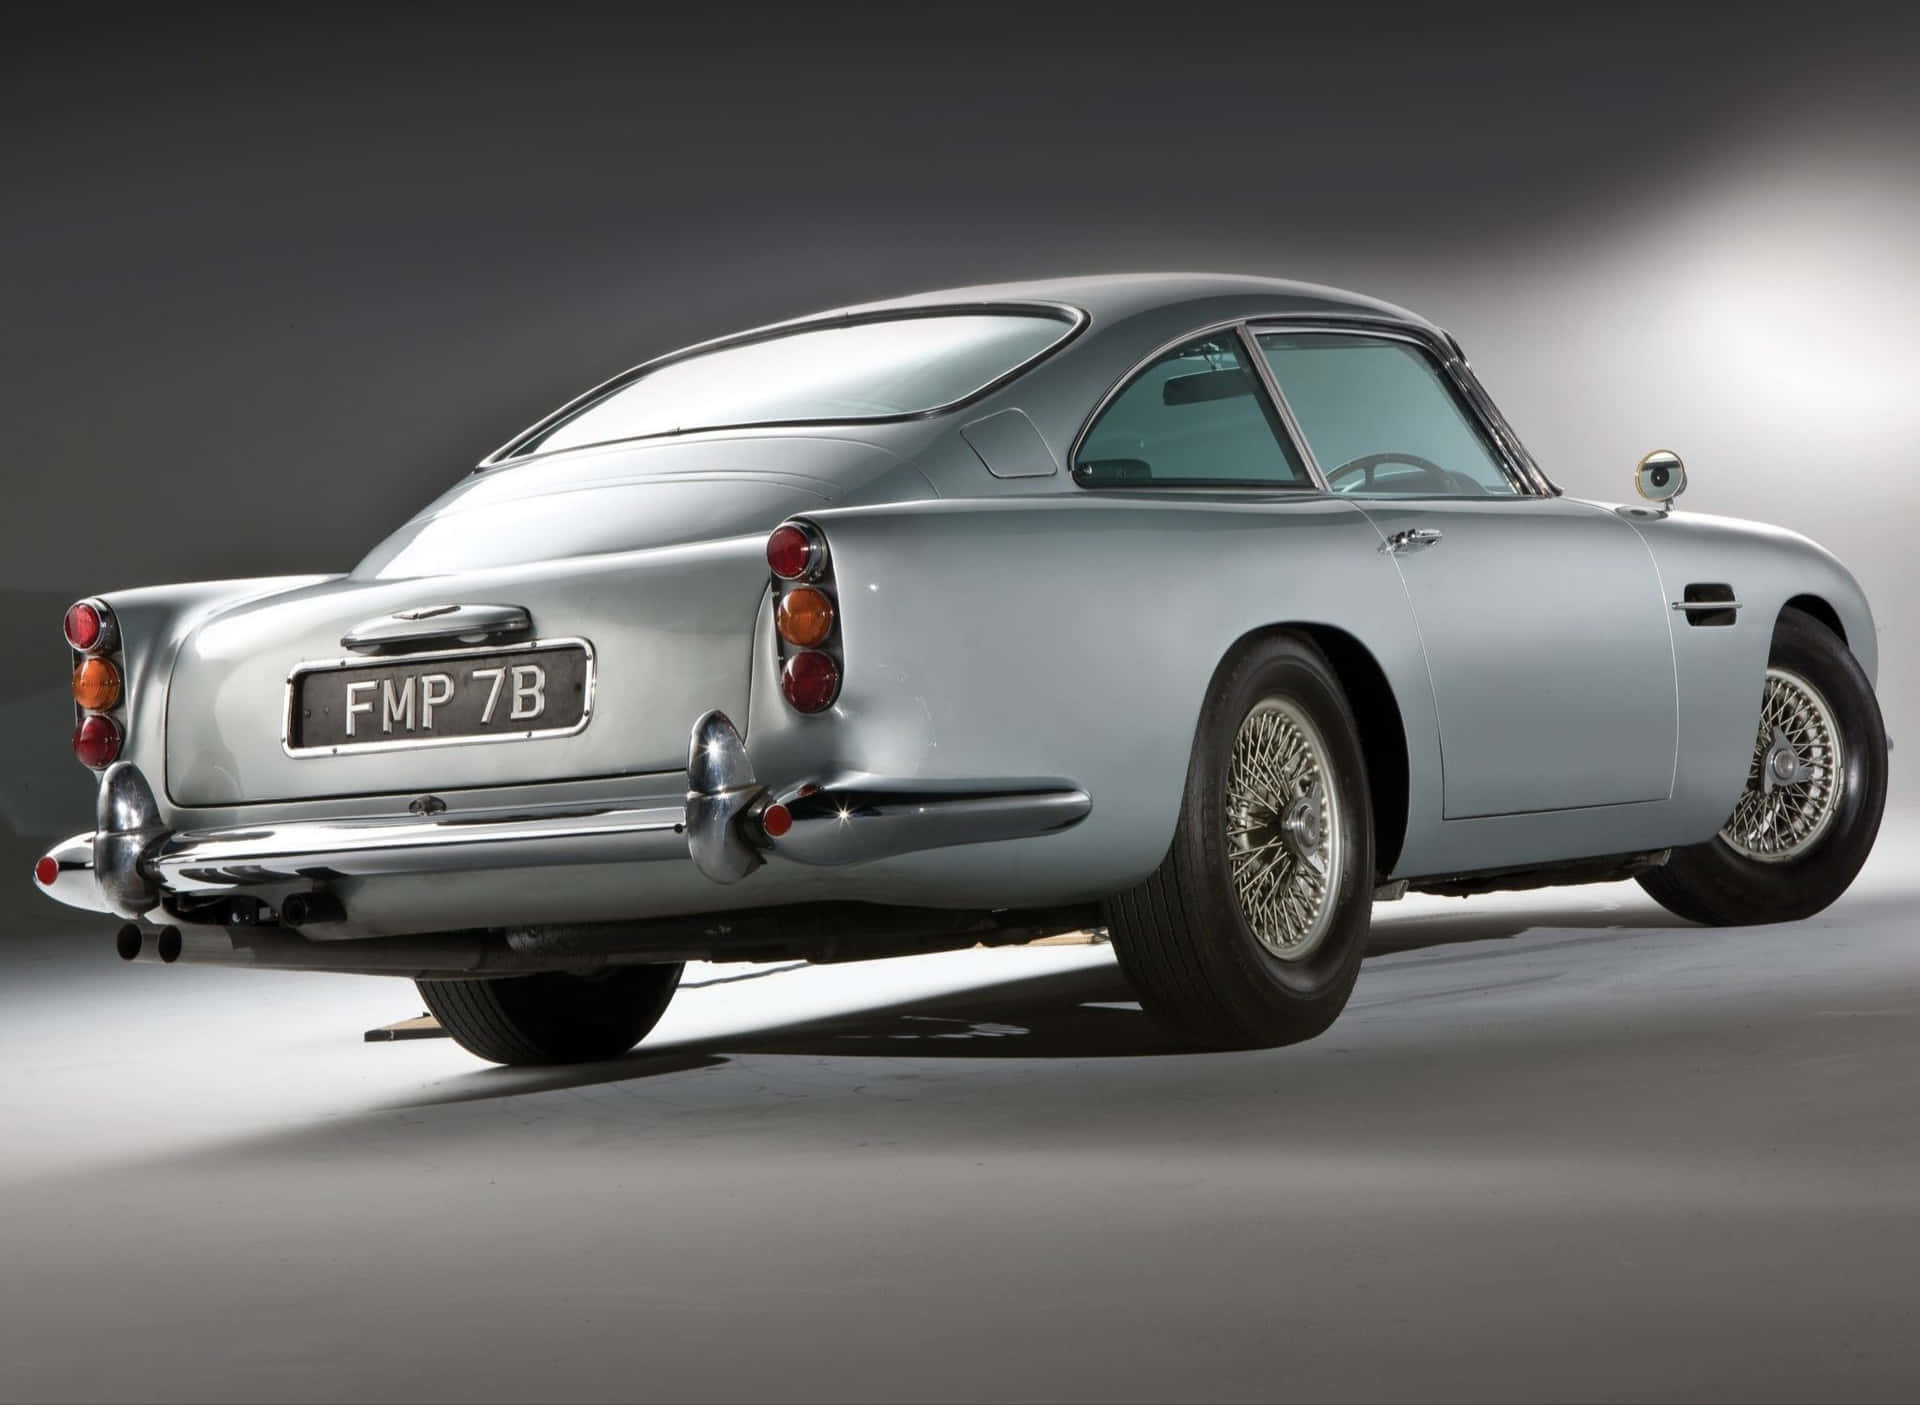 Caption: An Exquisite Aston Martin Db5 In Its Prime Wallpaper